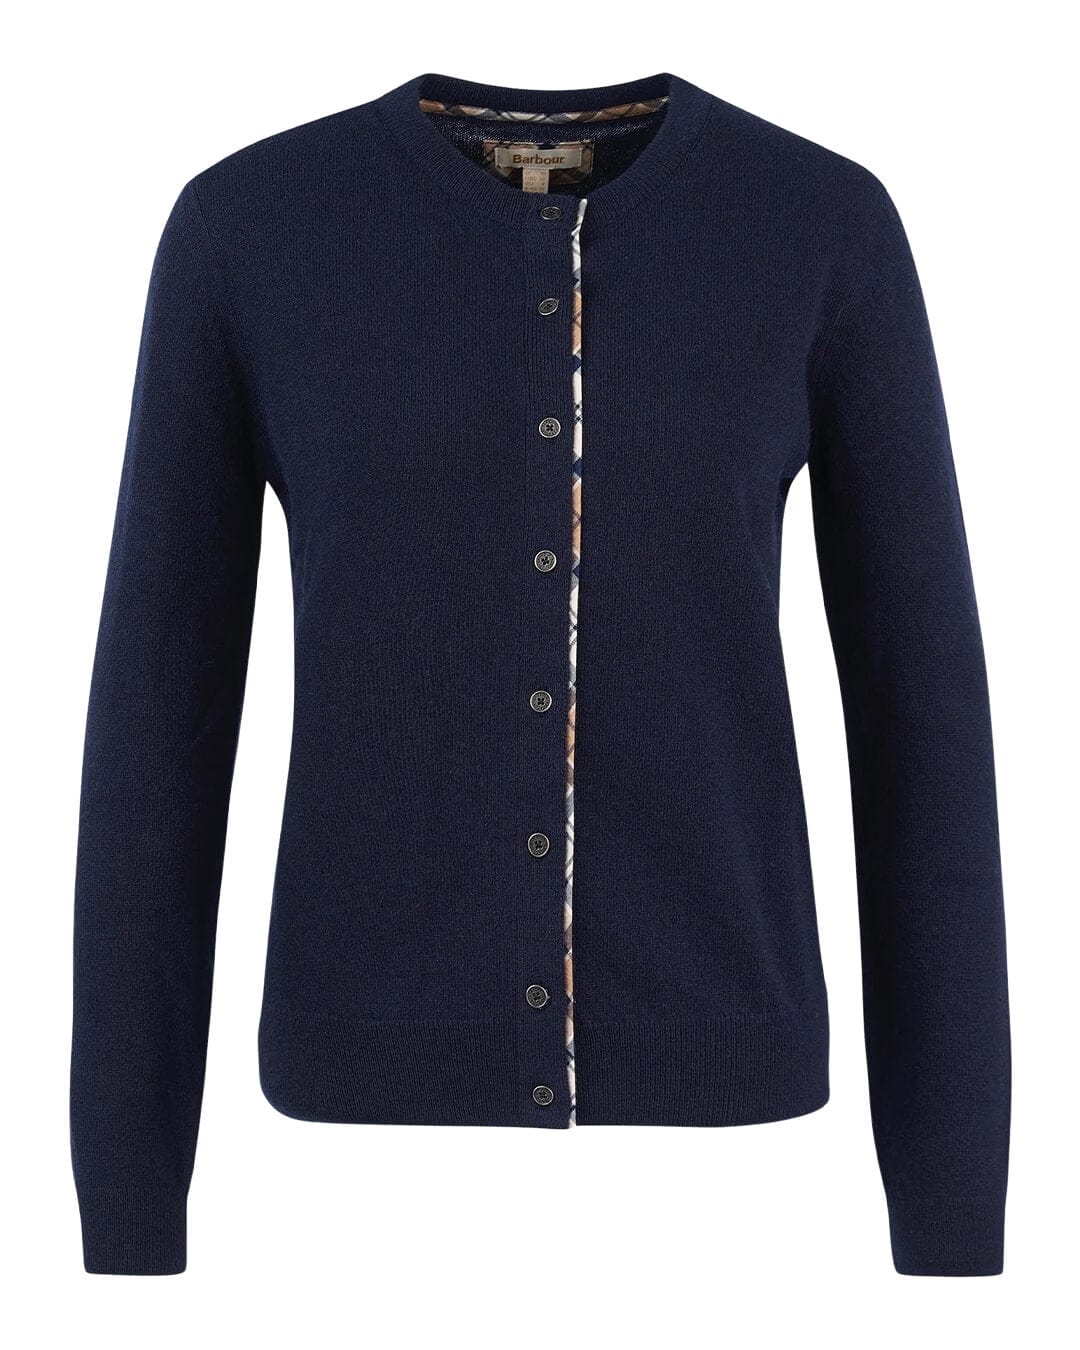 Barbour Jumpers Barbour Pendle Navy Cardigan